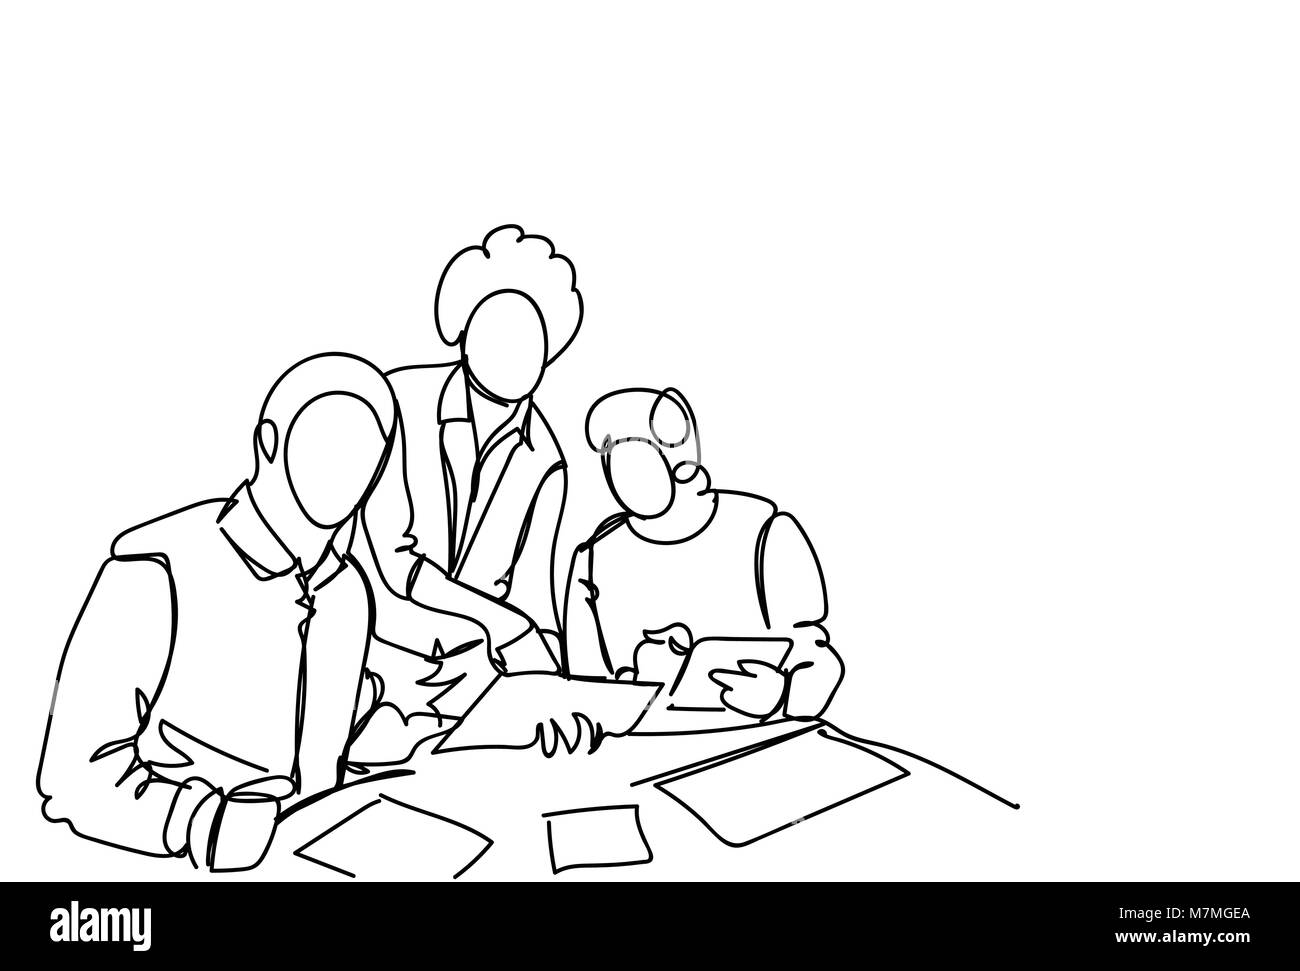 Business Men Team Working Together At New Startup During Brainstorming Meeting Simple Doodle Style Stock Vector